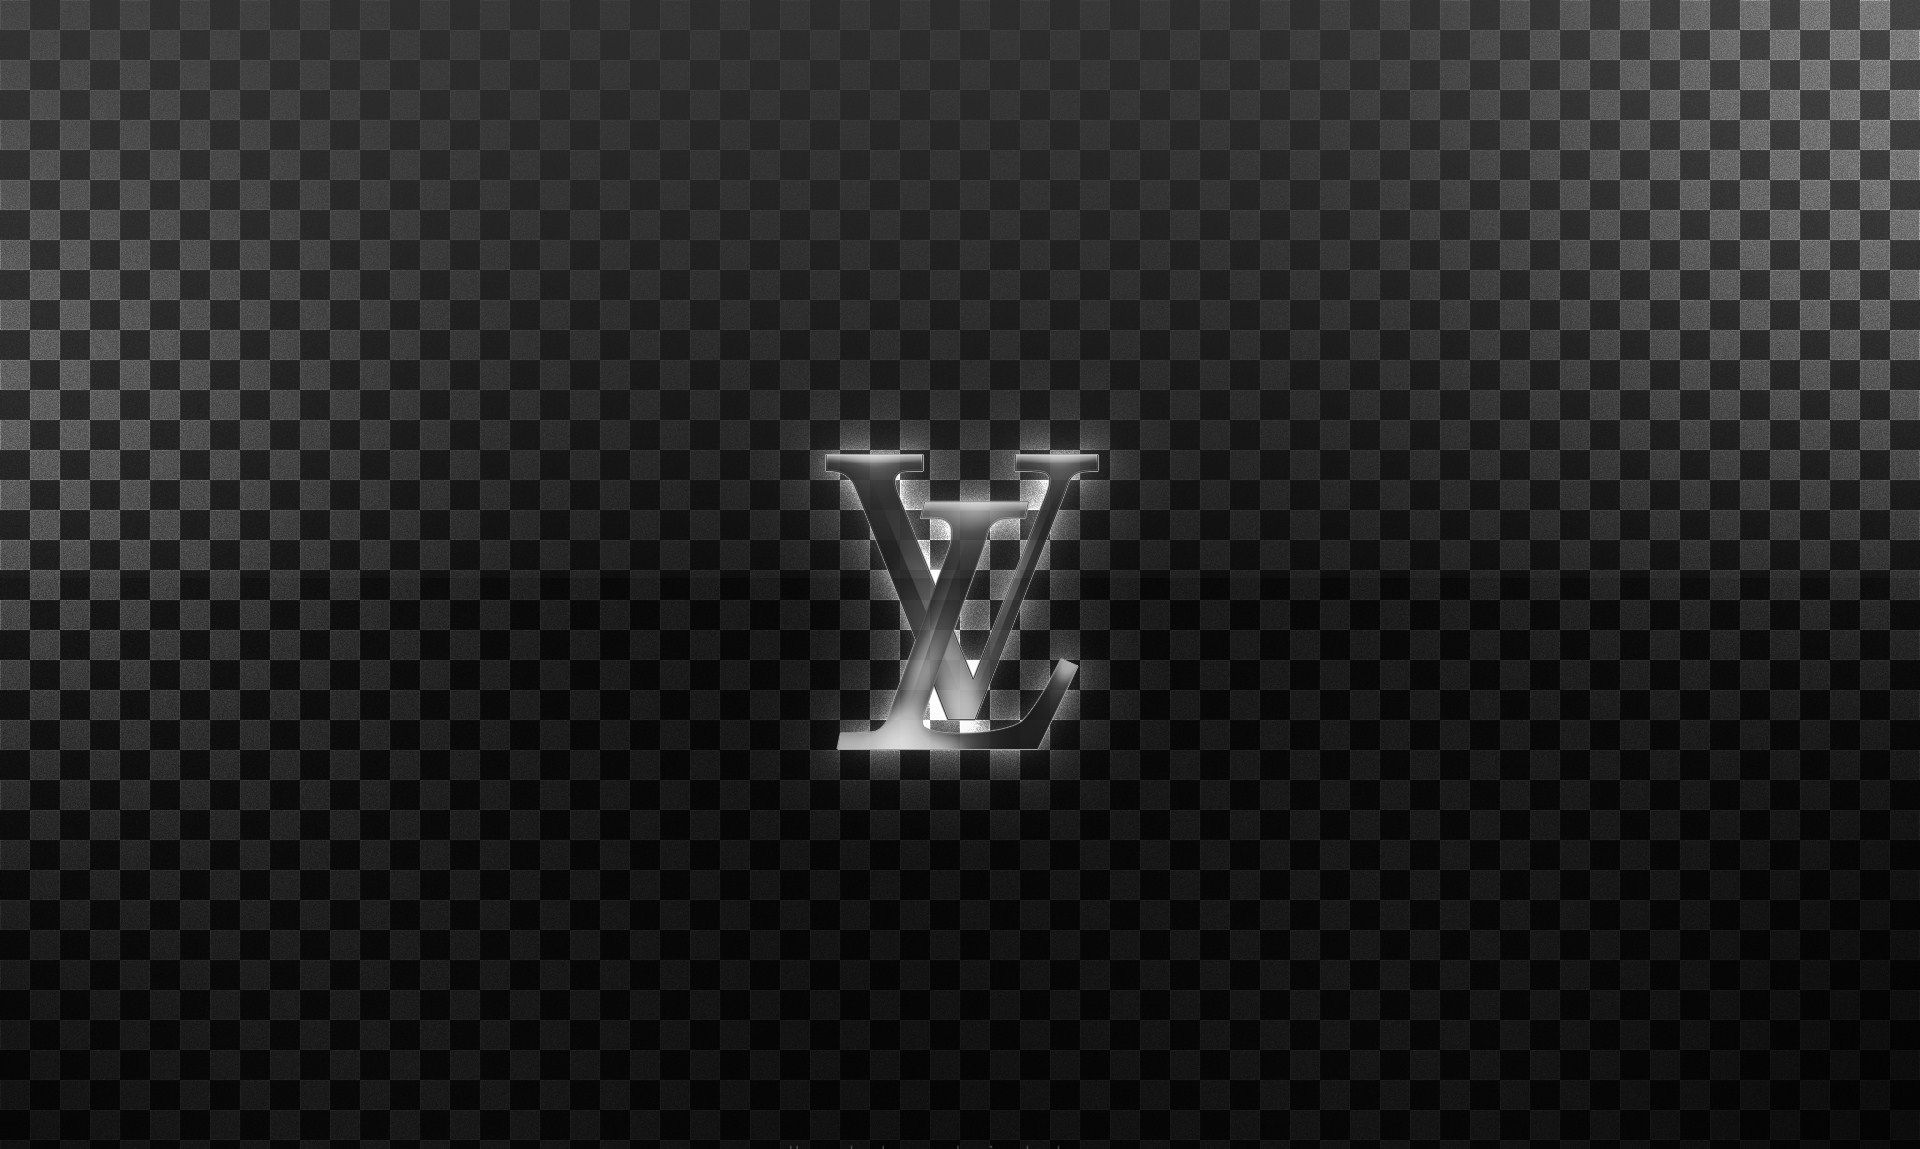 Louis Vuitton Wallpapers Download - KoLPaPer - Awesome Free HD Wallpapers